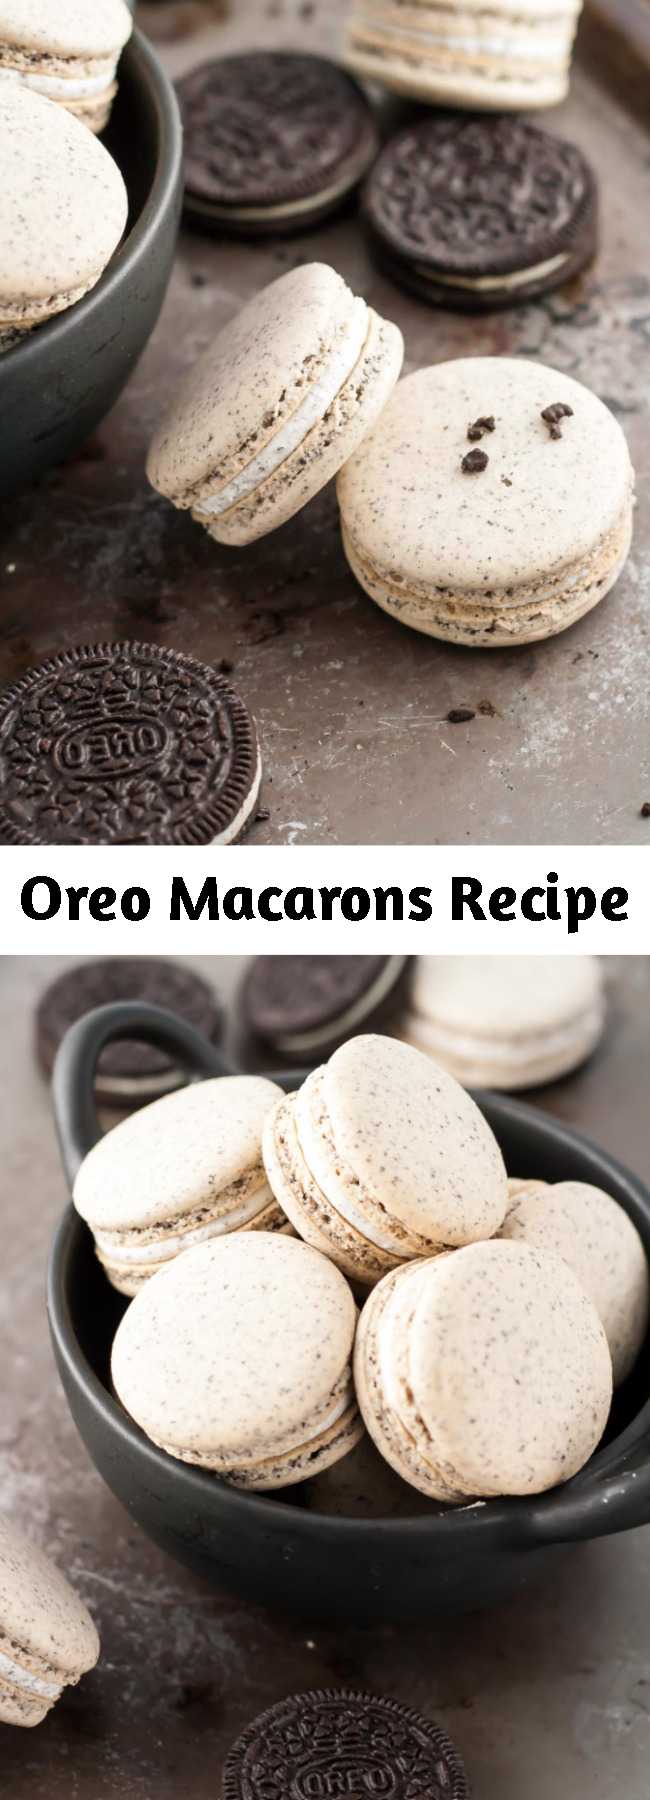 Oreo Macarons Recipe - Turn your favourite store-bought classics into something even more decadent with these delicate Oreo macarons.